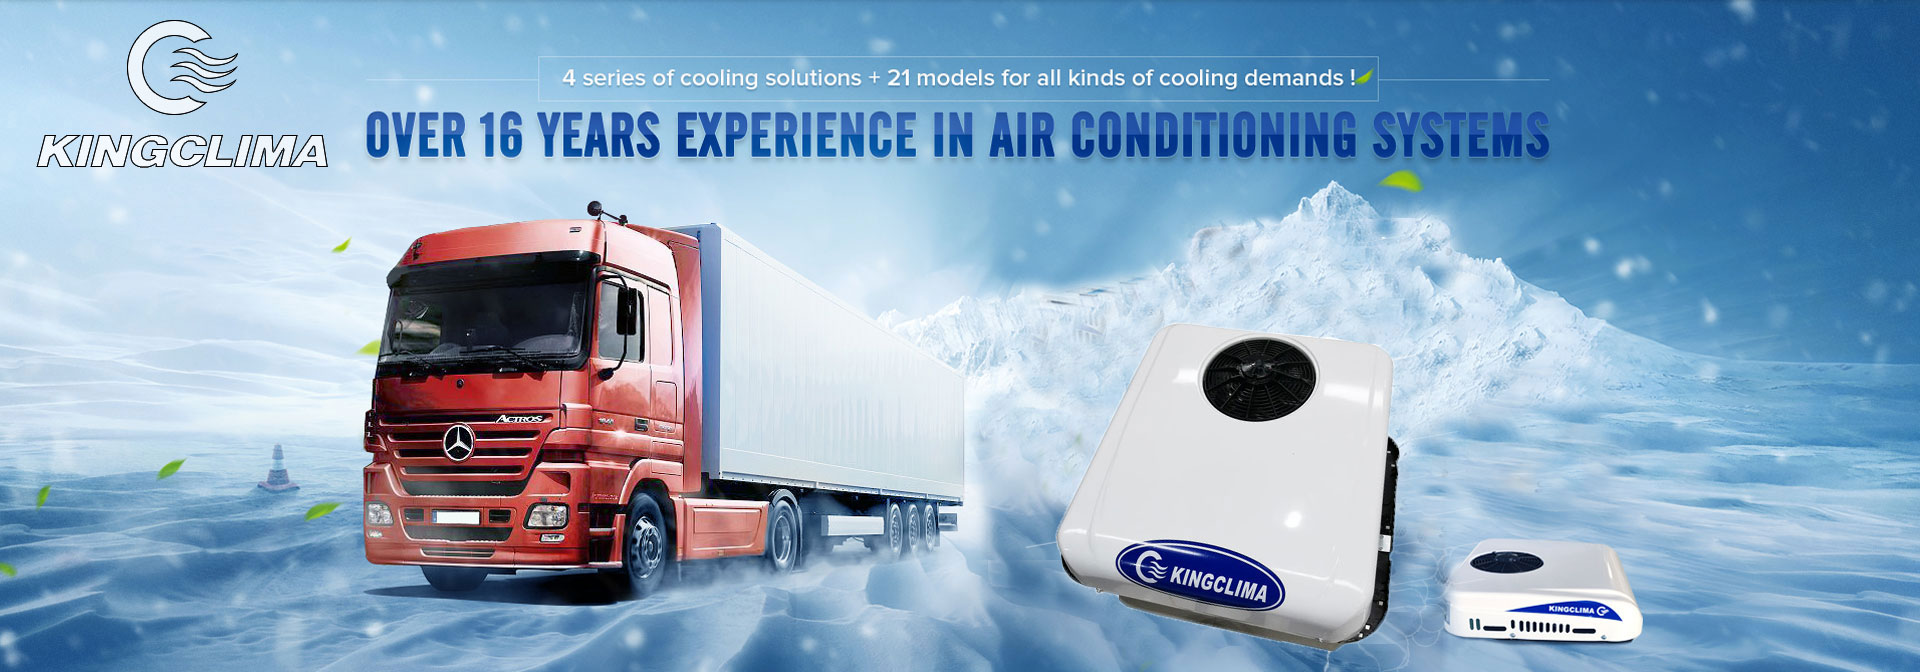 Coolpro2300 Rooftop Parking Cooler Air Conditioning Portable Truck Auto Electric Intelligent System 24V